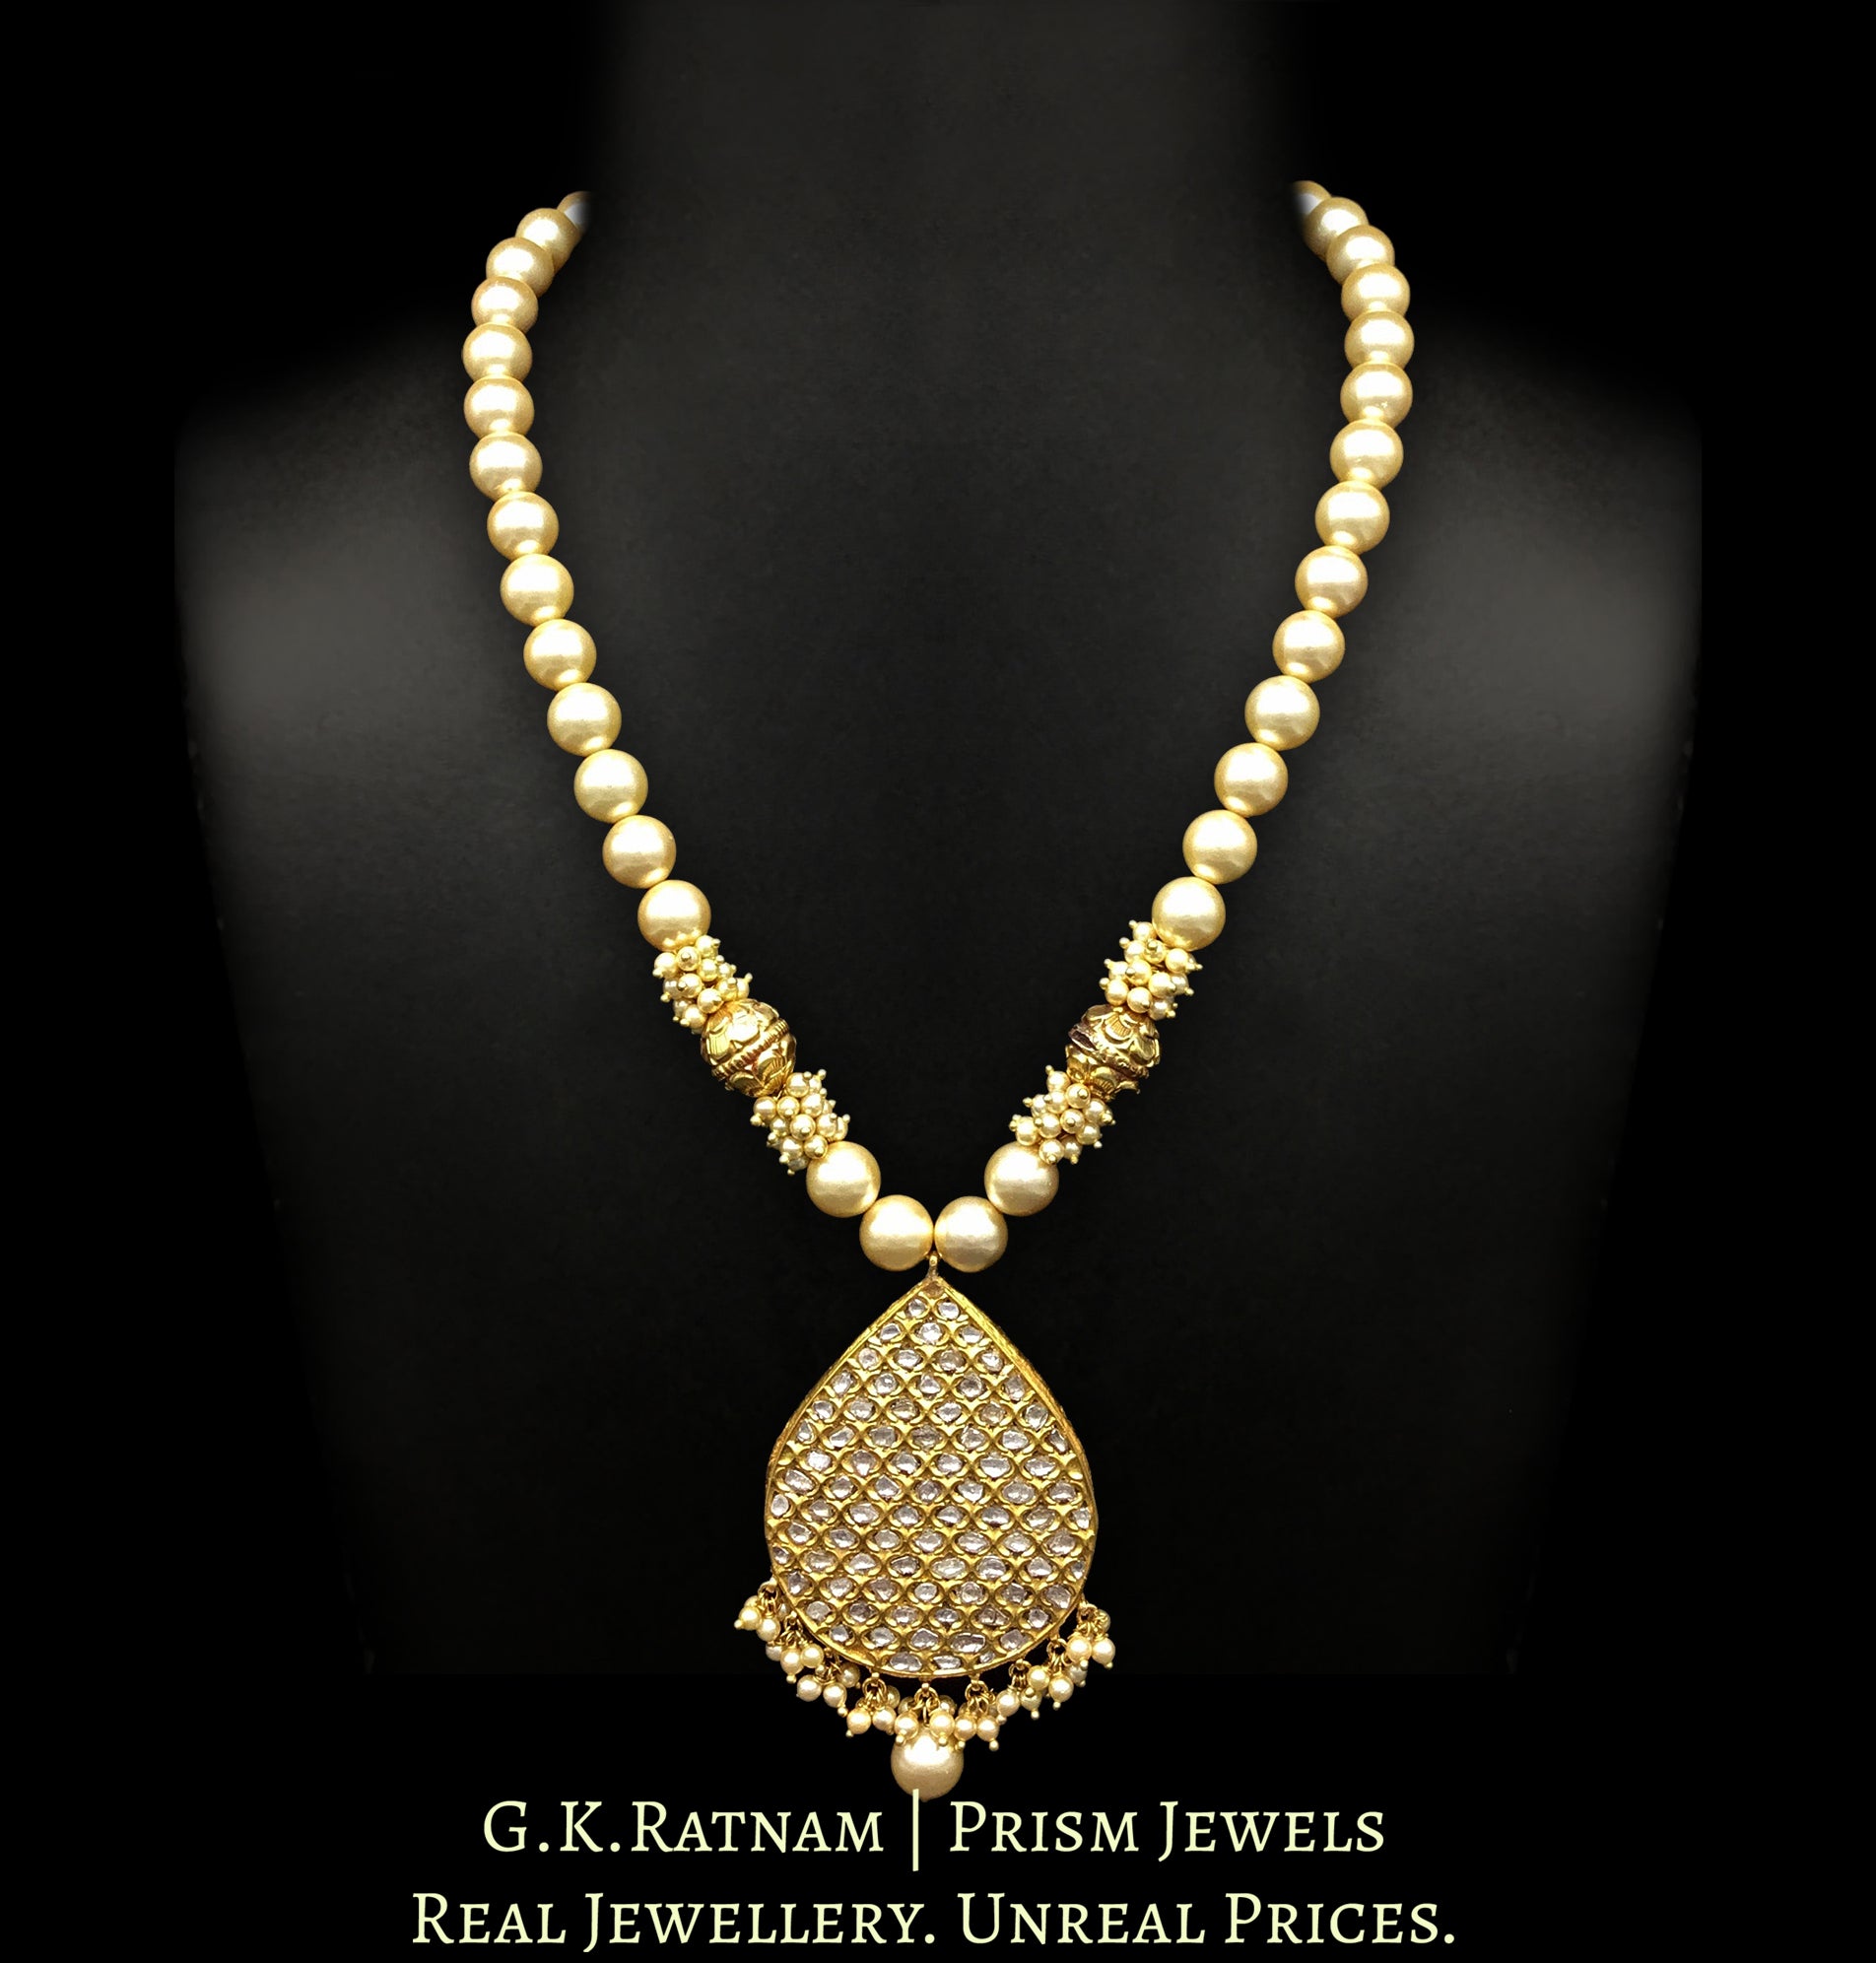 23k Gold and Diamond Polki tilak (pear) shaped Pendant with pearls and hand carved golden balls